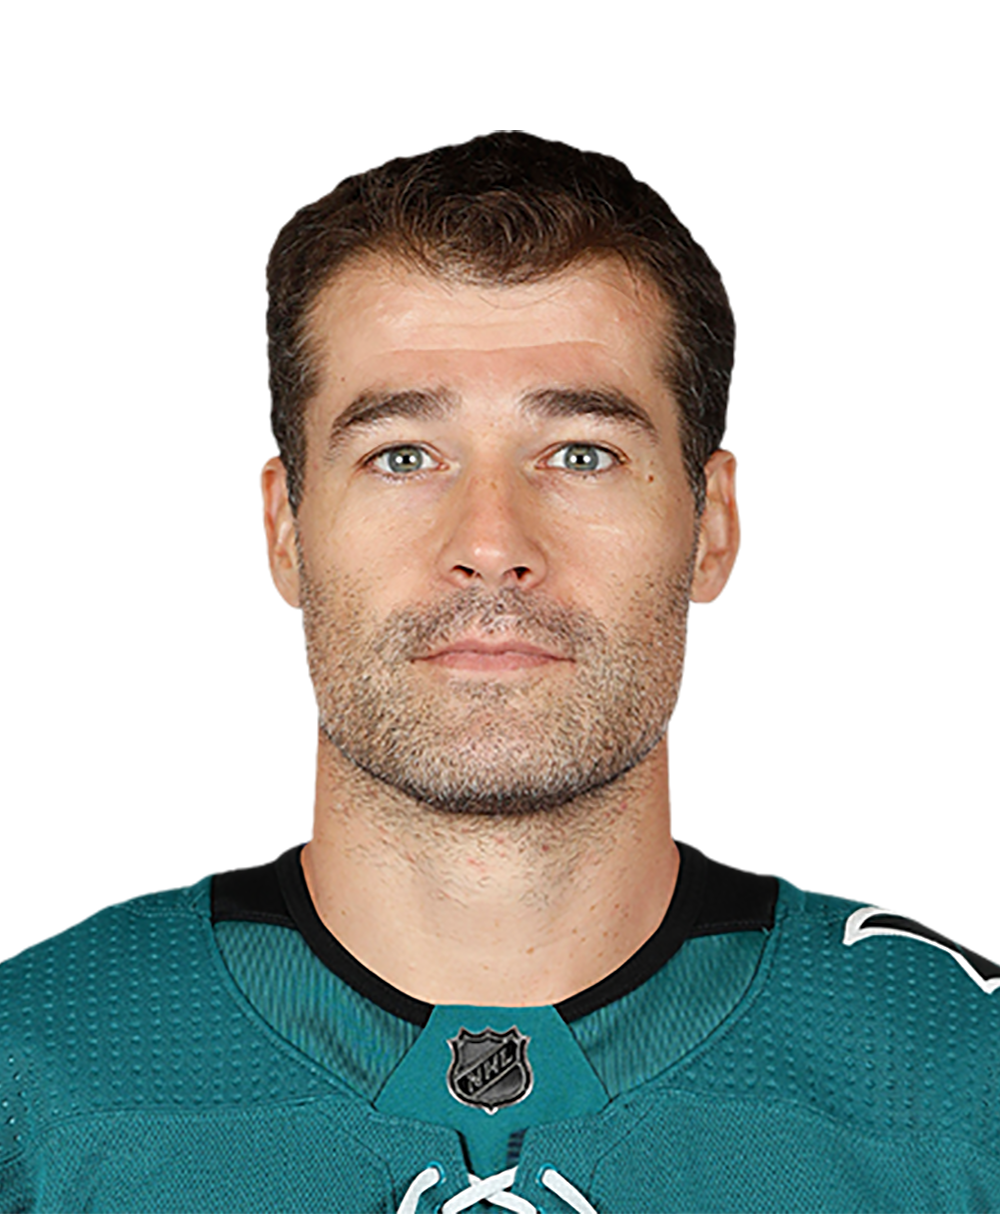 Patrick Marleau retires after 23 seasons, holds record for most